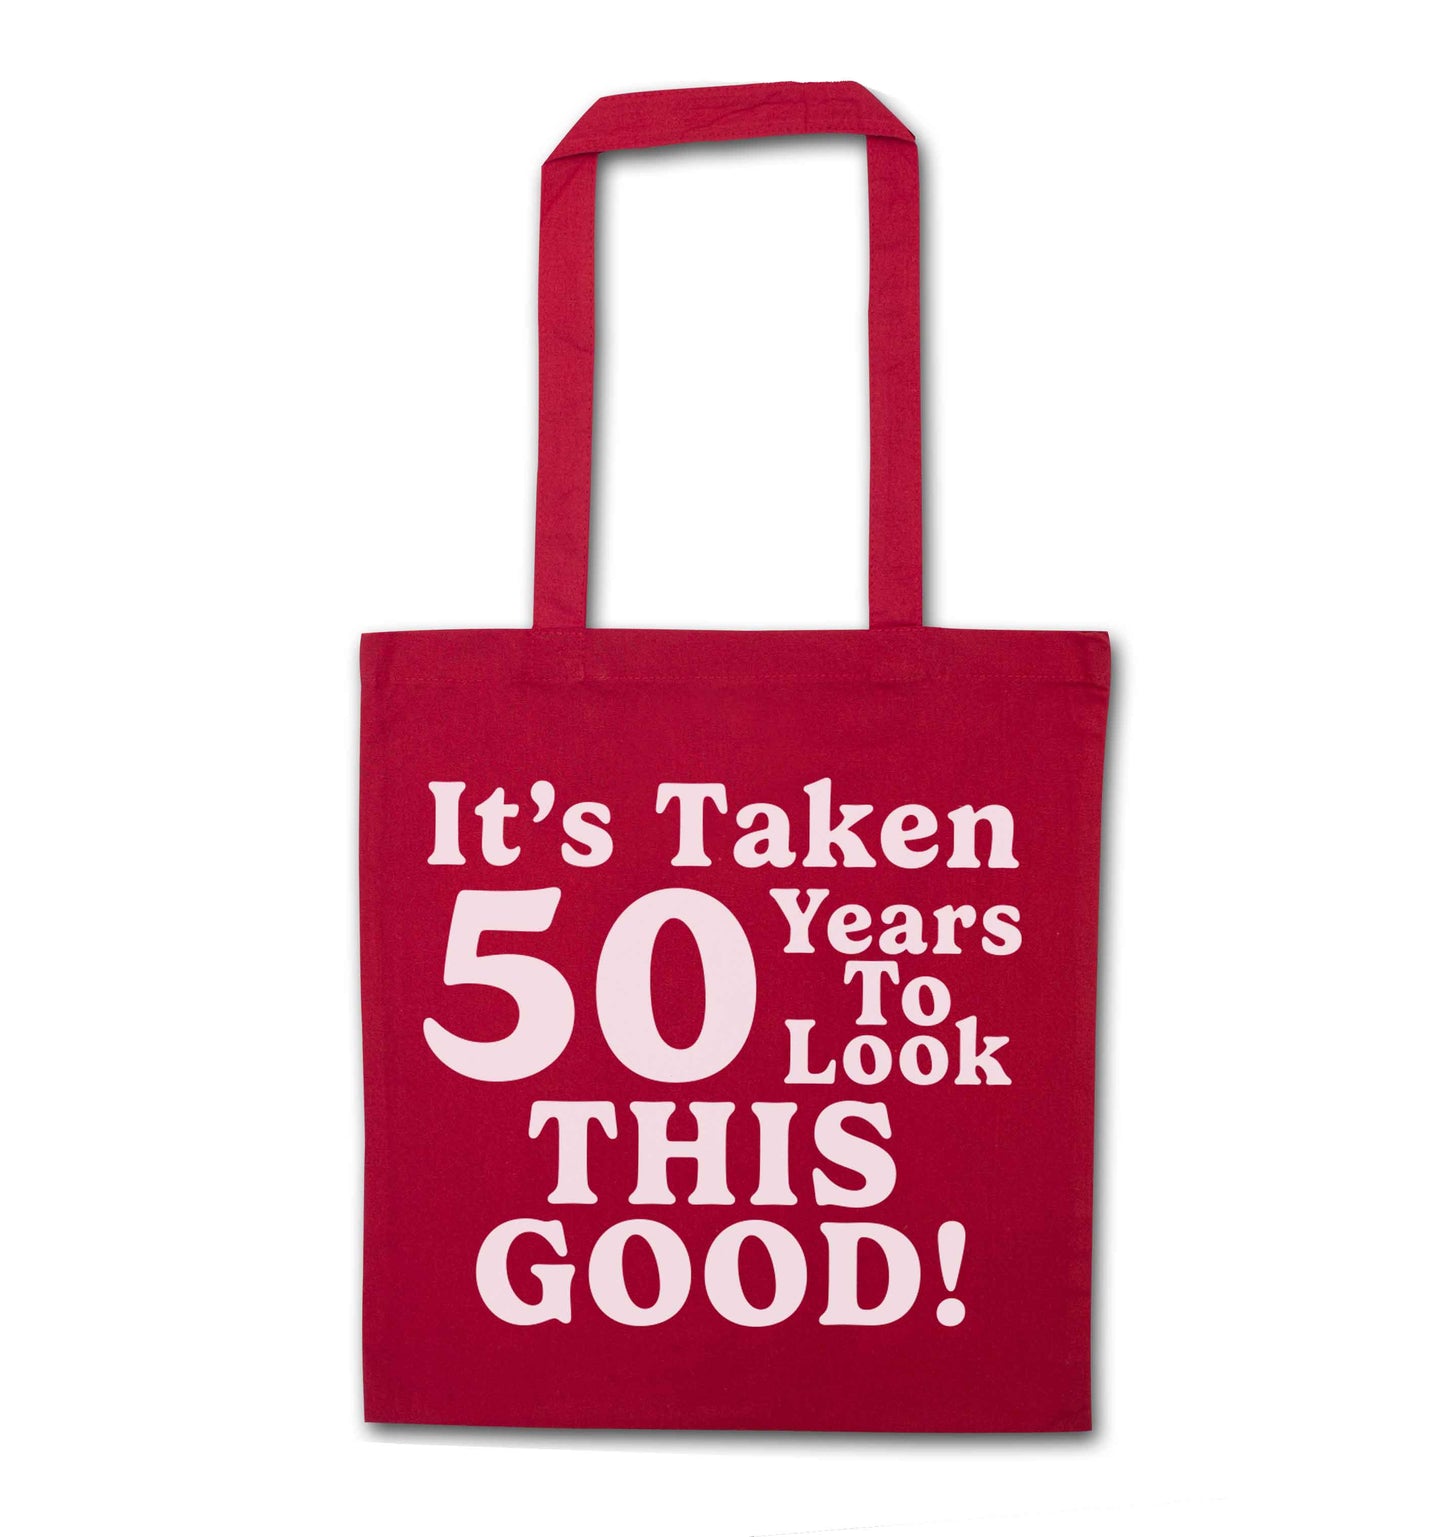 It's taken 50 years to look this good! red tote bag